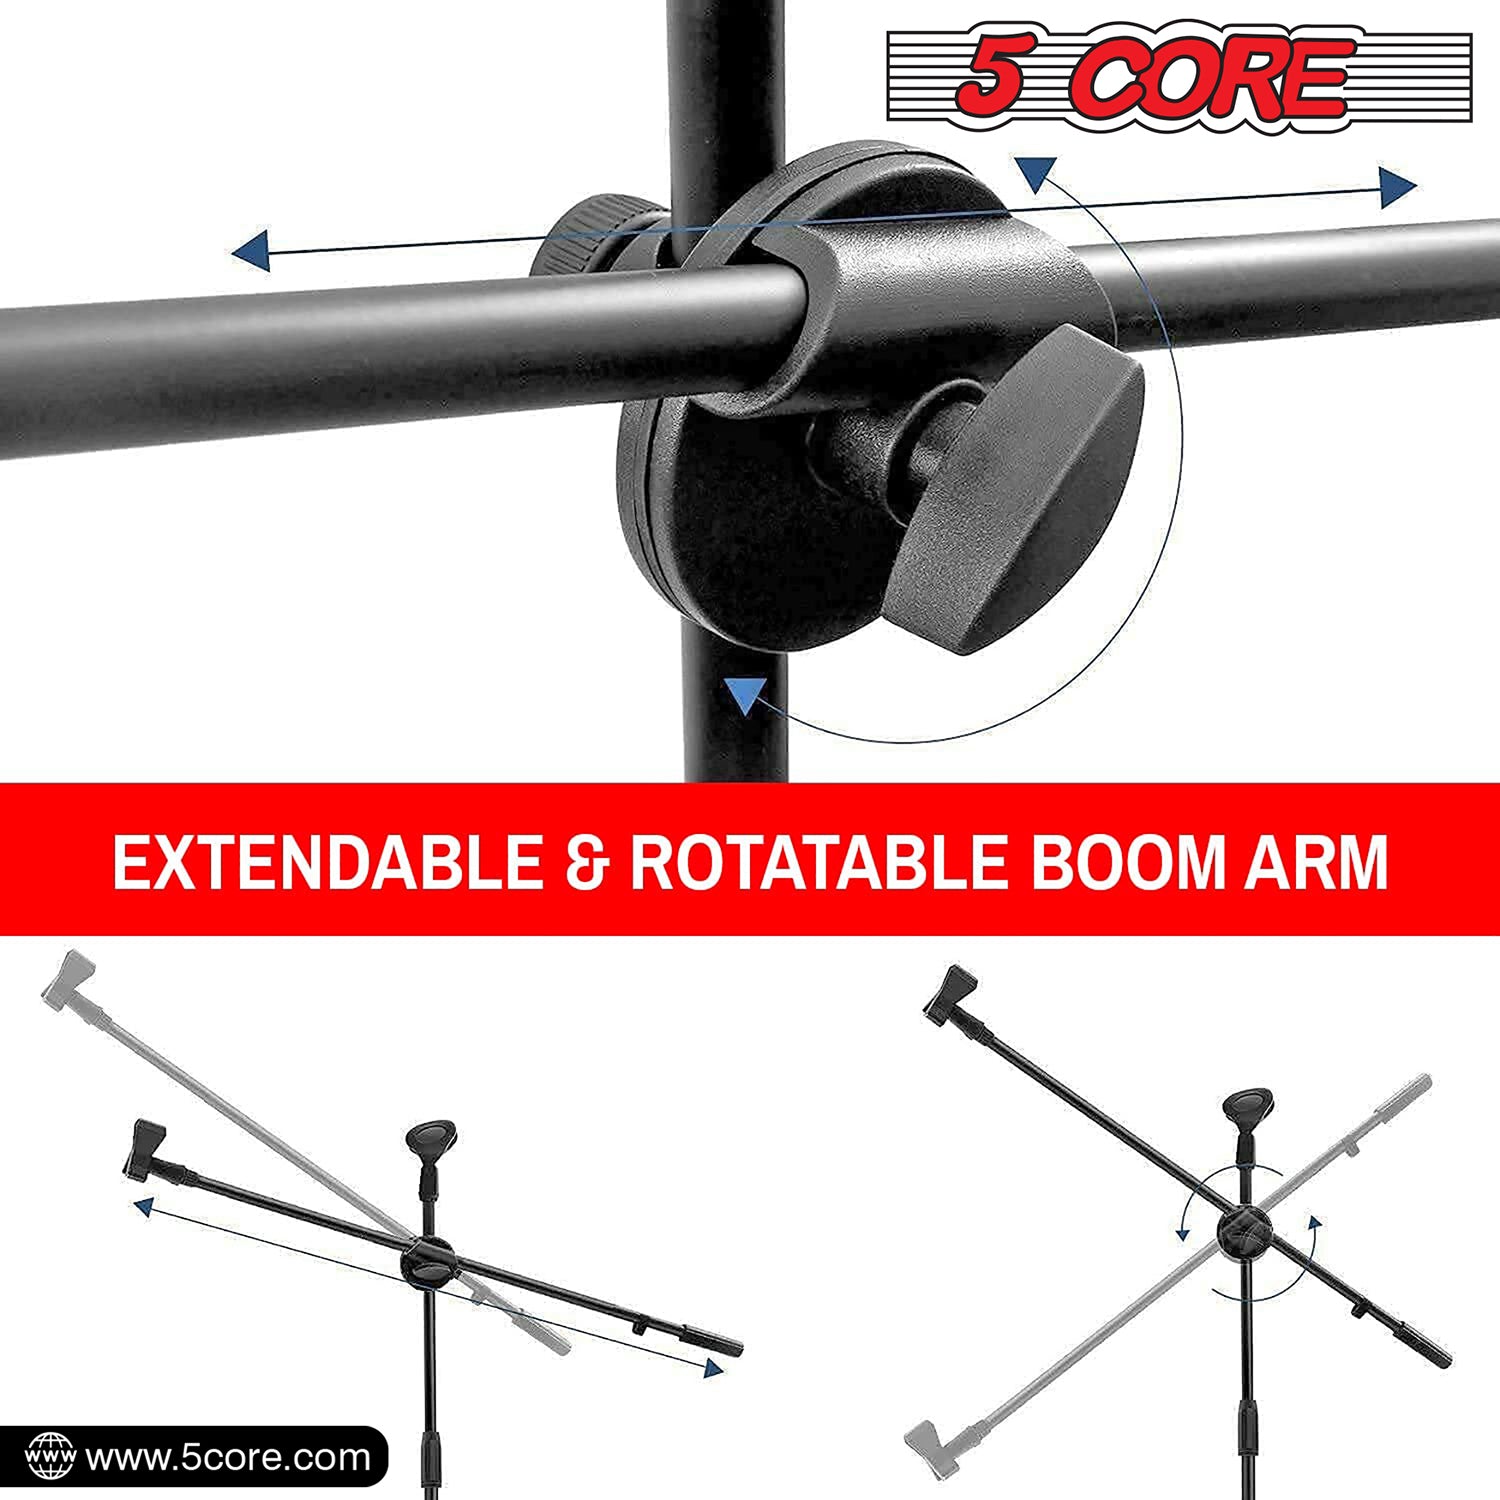 5 Core Tripod Mic Stand 59" Adjustable Microphone Stands Floor w Boom Arm